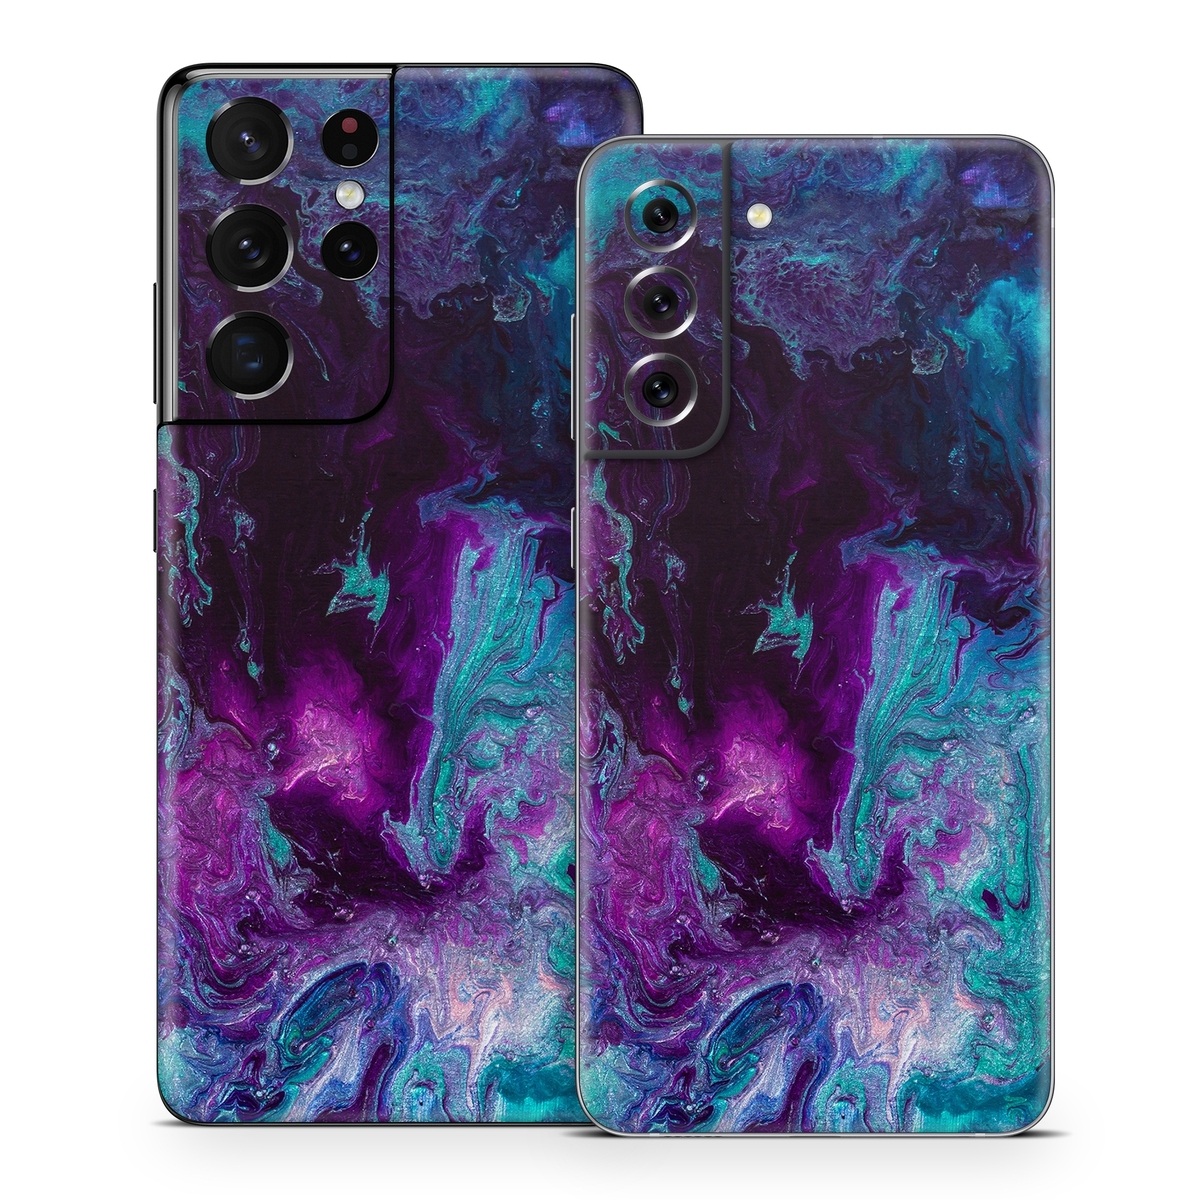 Samsung Galaxy S21 Skin design of Blue, Purple, Violet, Water, Turquoise, Aqua, Pink, Magenta, Teal, Electric blue with blue, purple, black colors